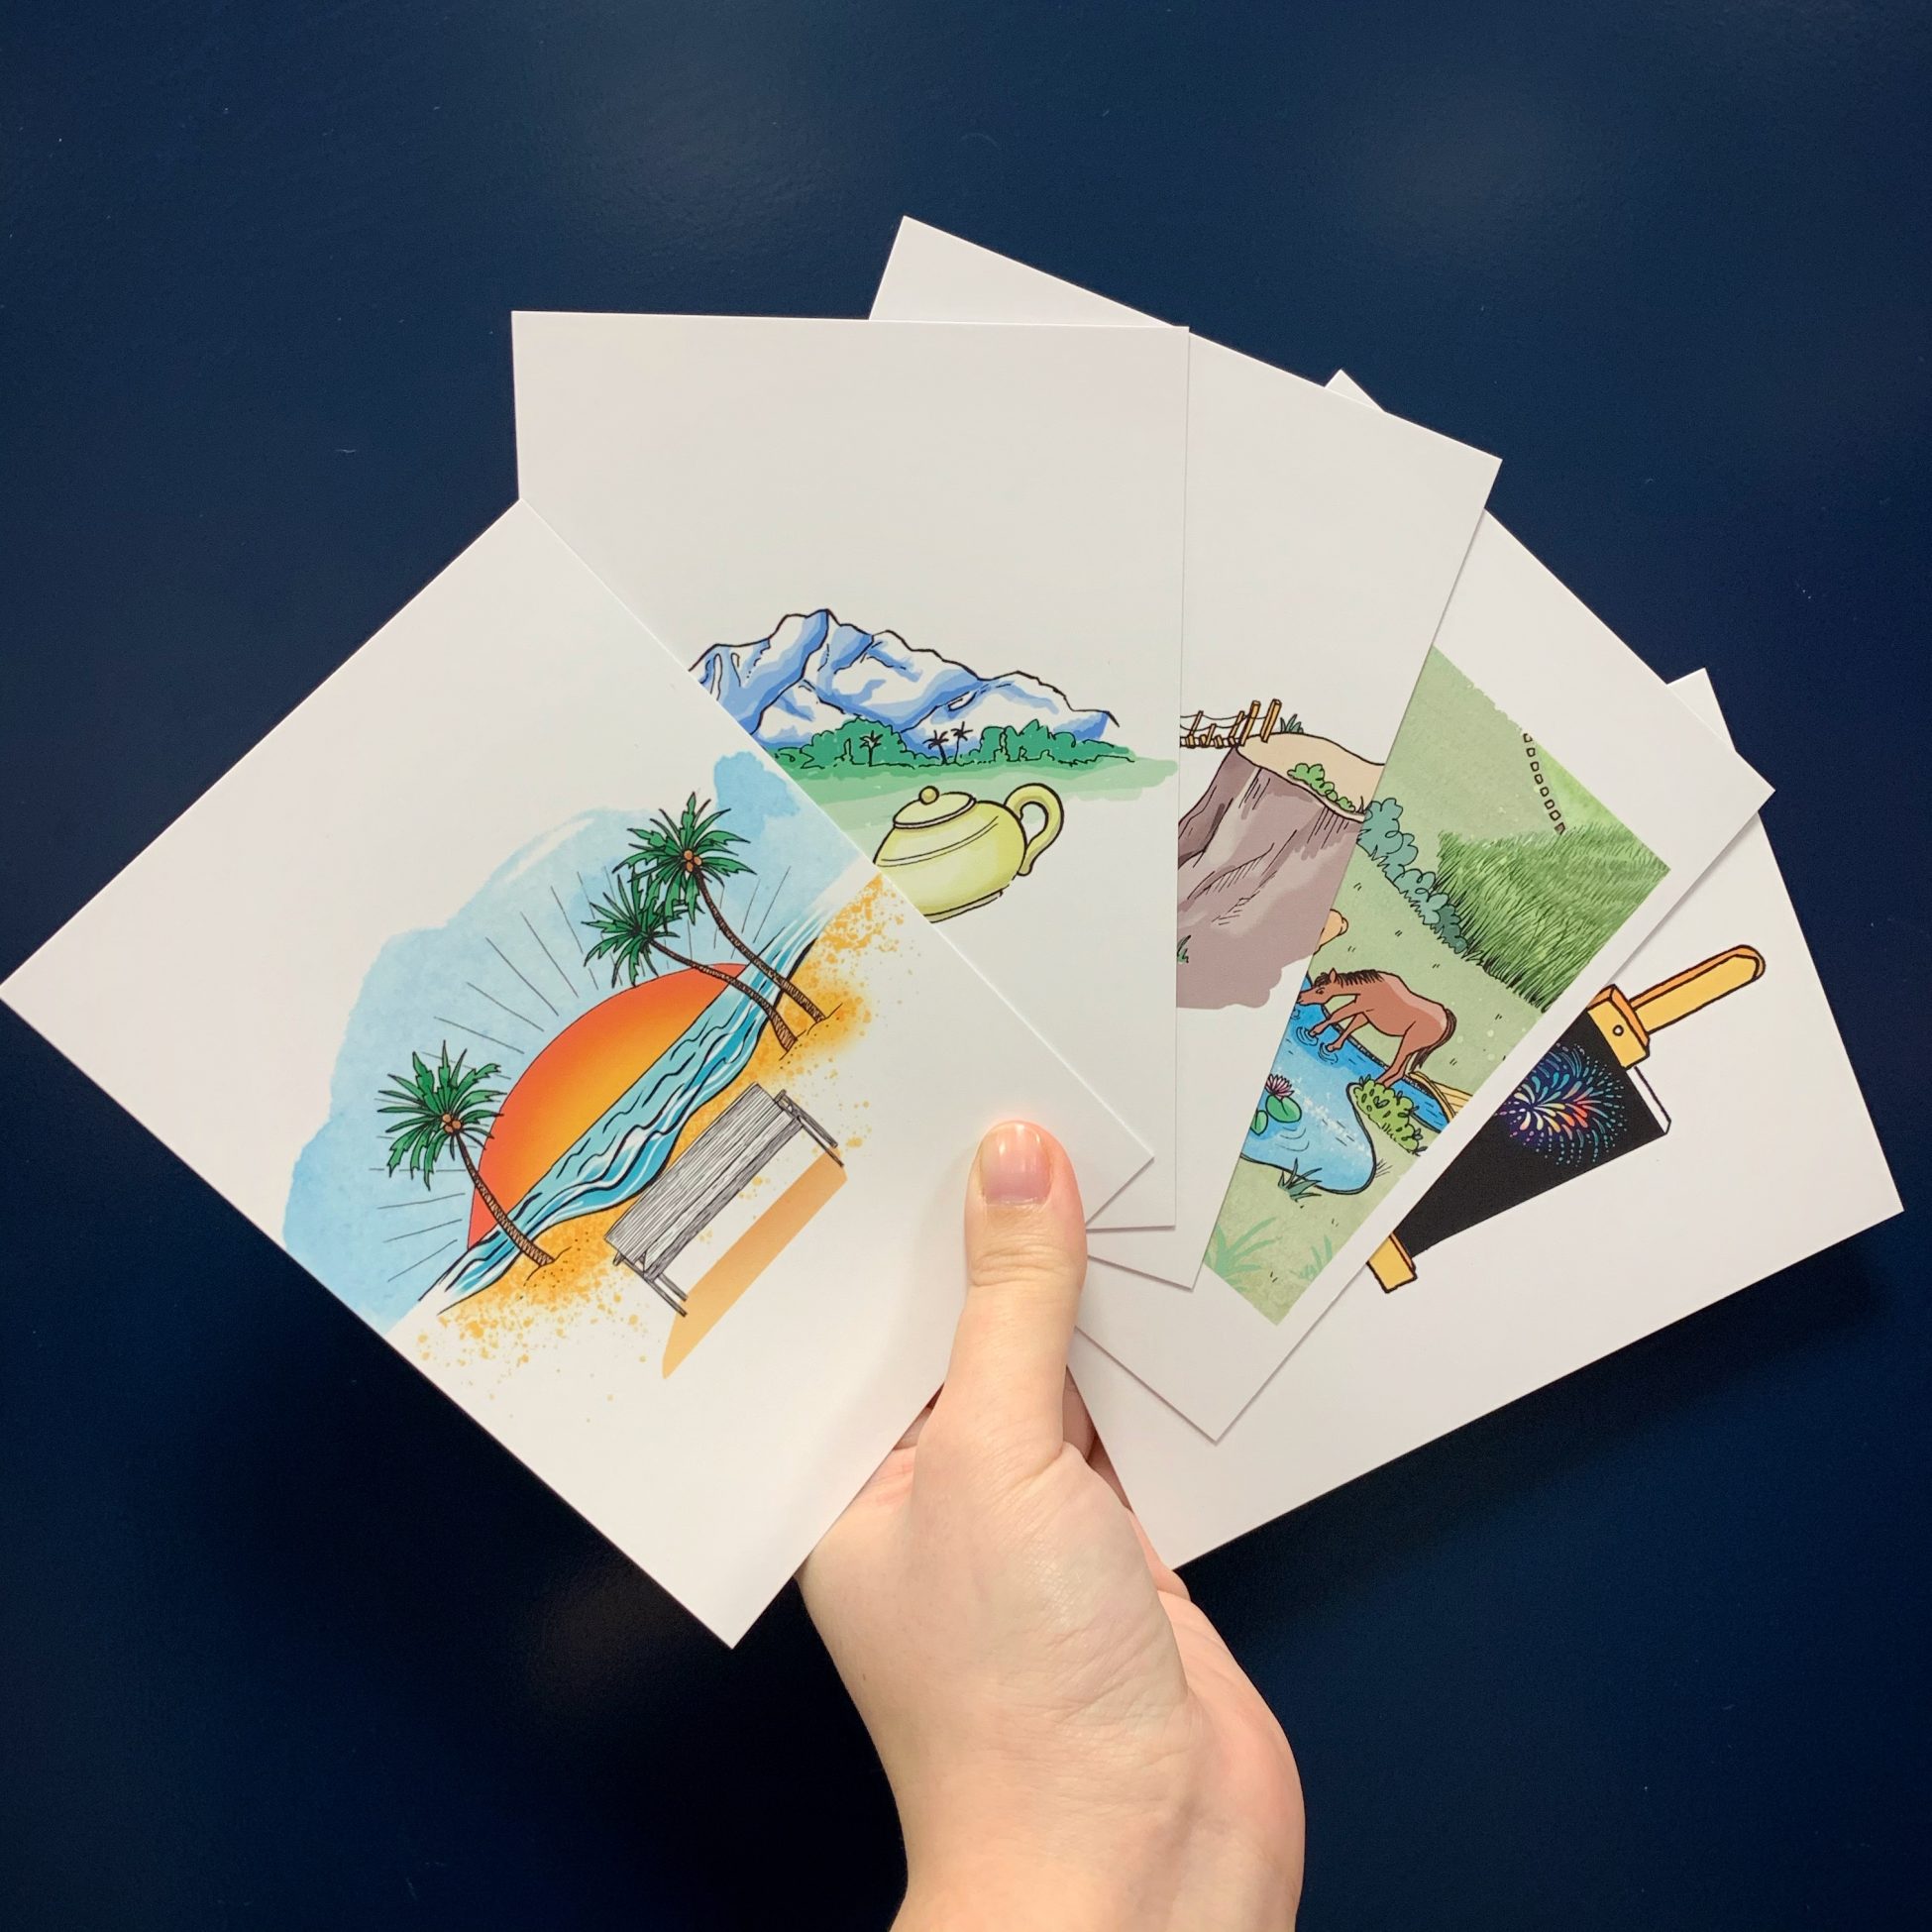 Photo of a hand holding five fanned out A6 cards, each with an illustration